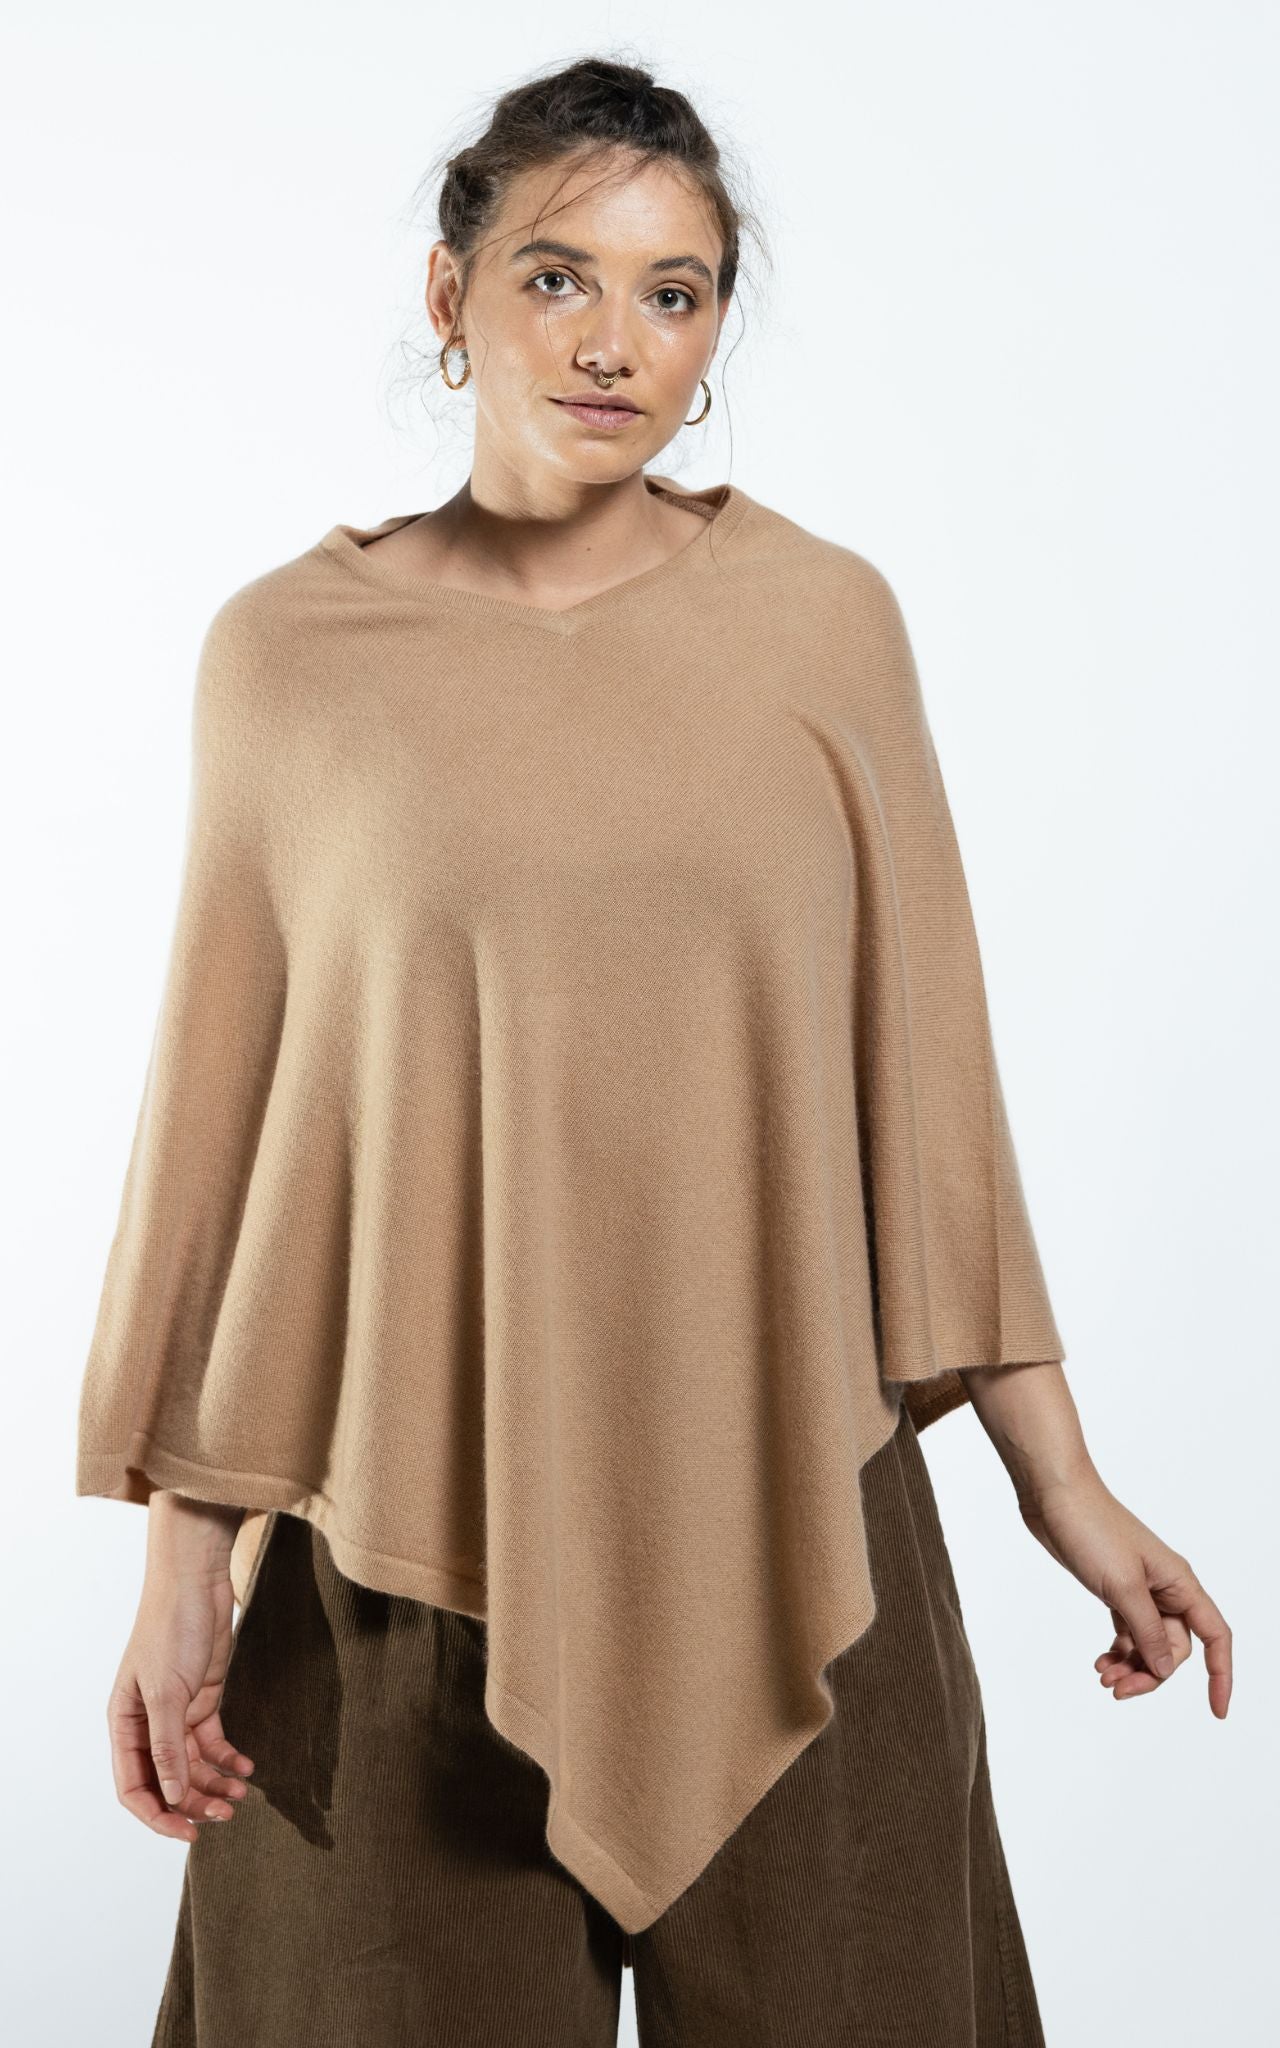 Surya Australia Ethical Cashmere Poncho made in Nepal - Almond